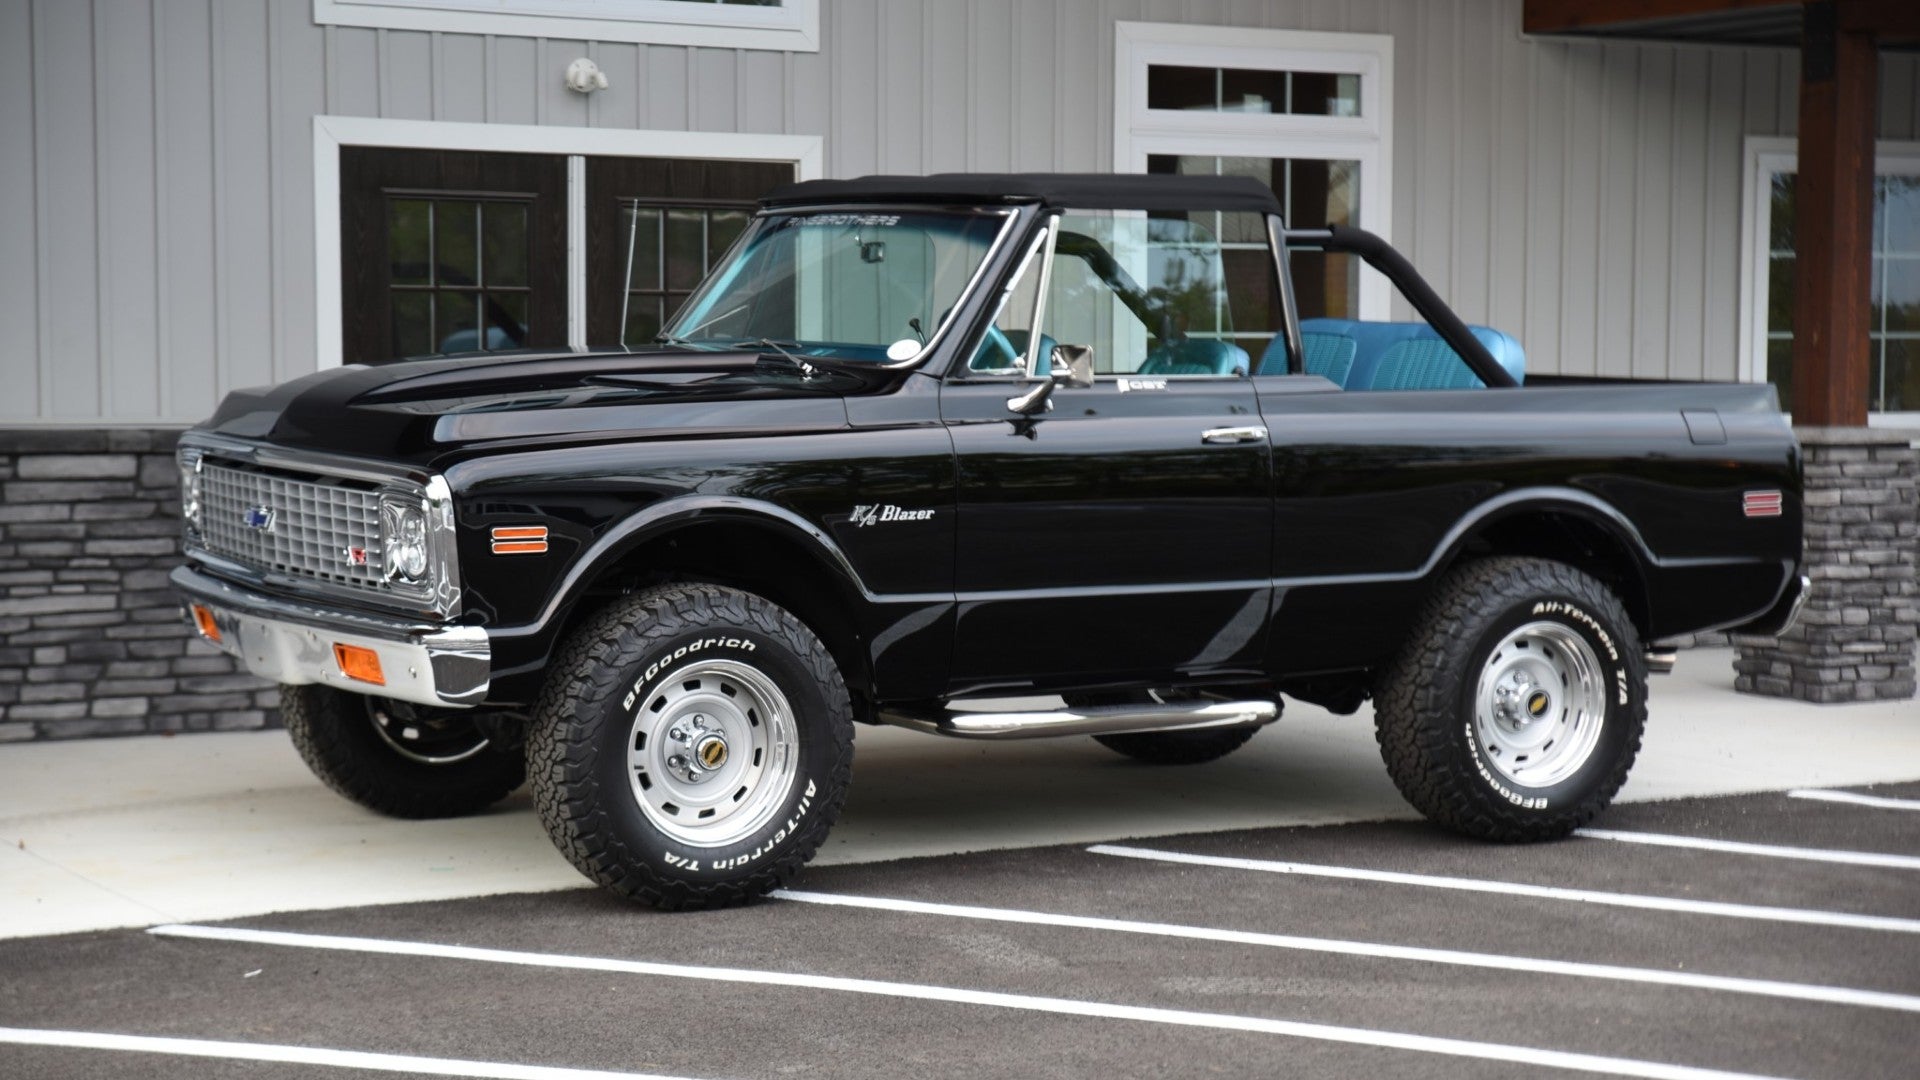 Chevrolet Blazer K5 Restomod That Sold For $300K Has To Be A Record Breaker